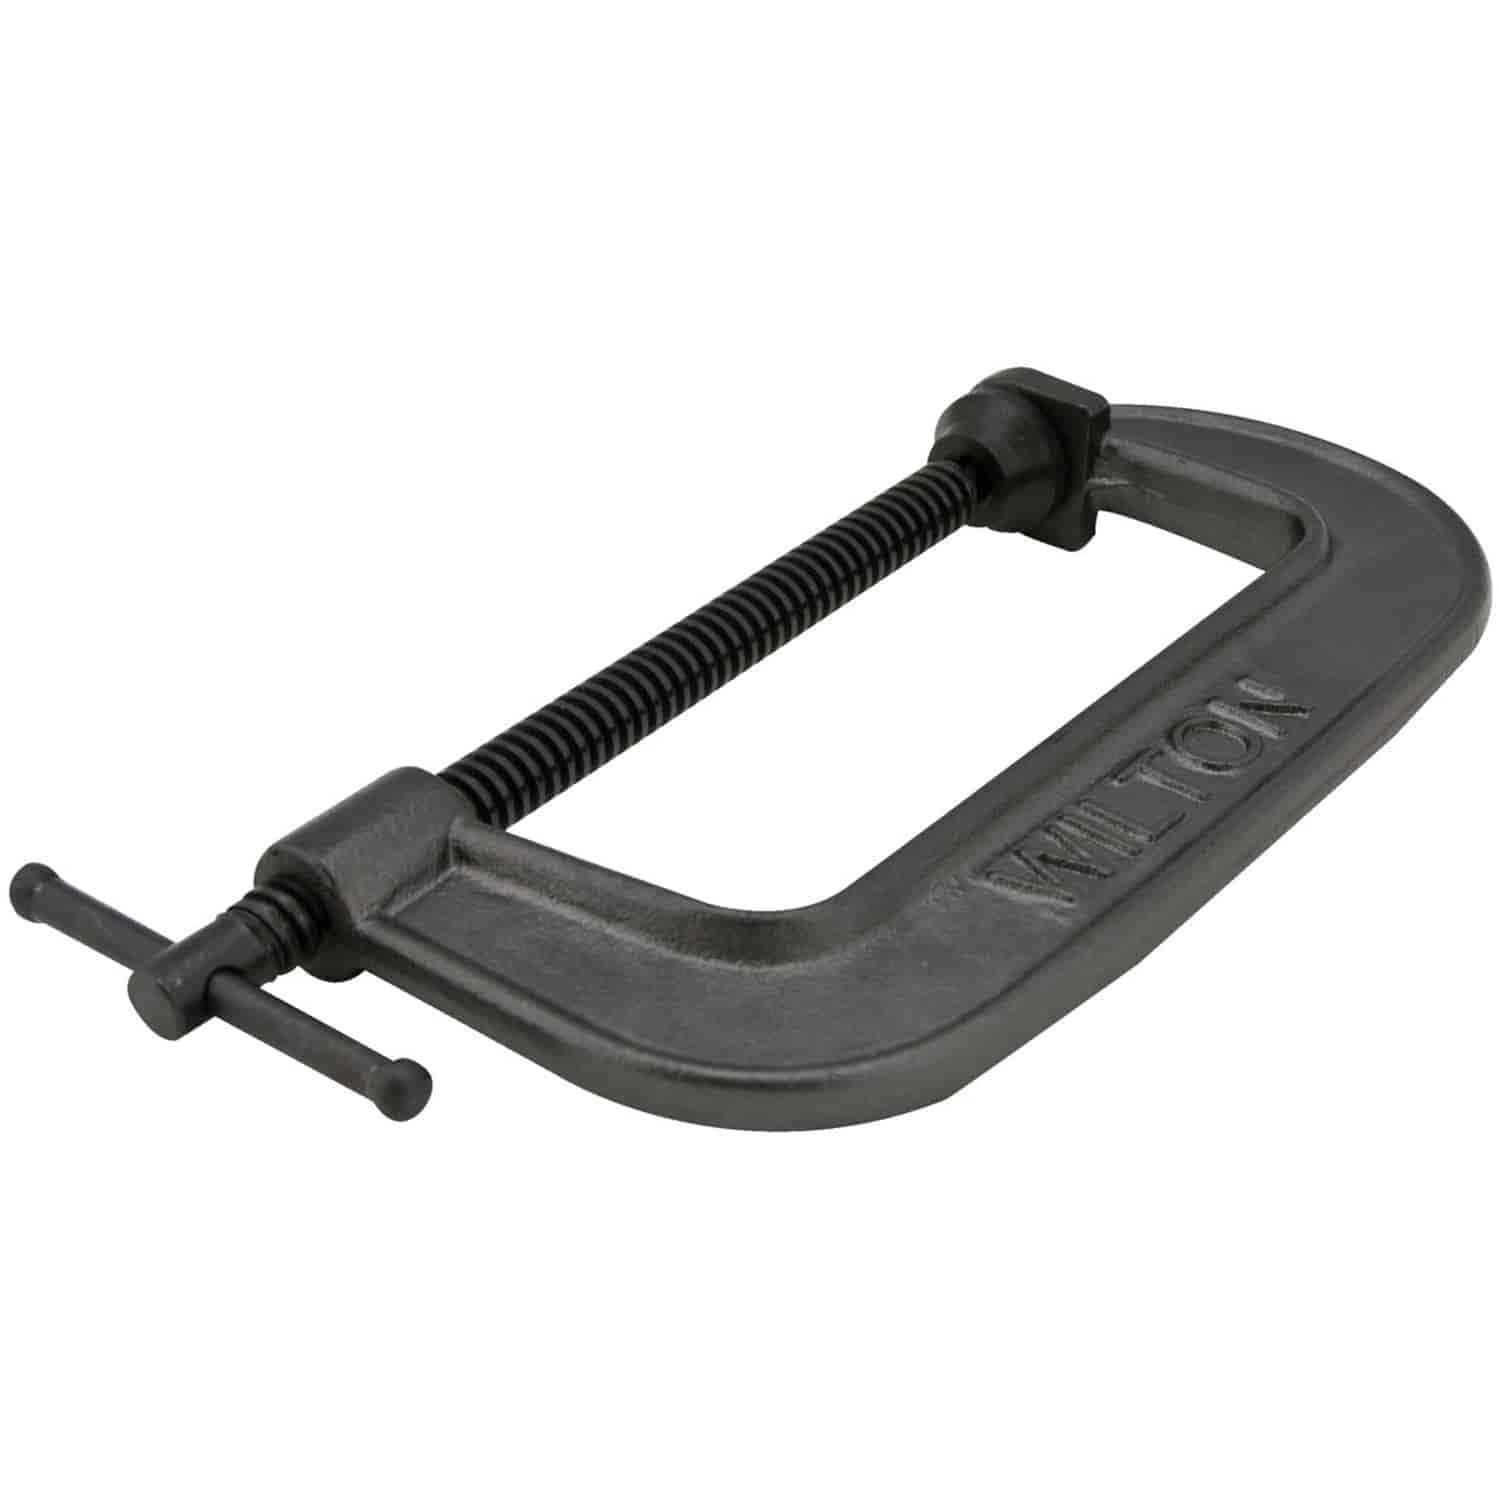 540A Series C-Clamp Opening Capacity Max: 14"